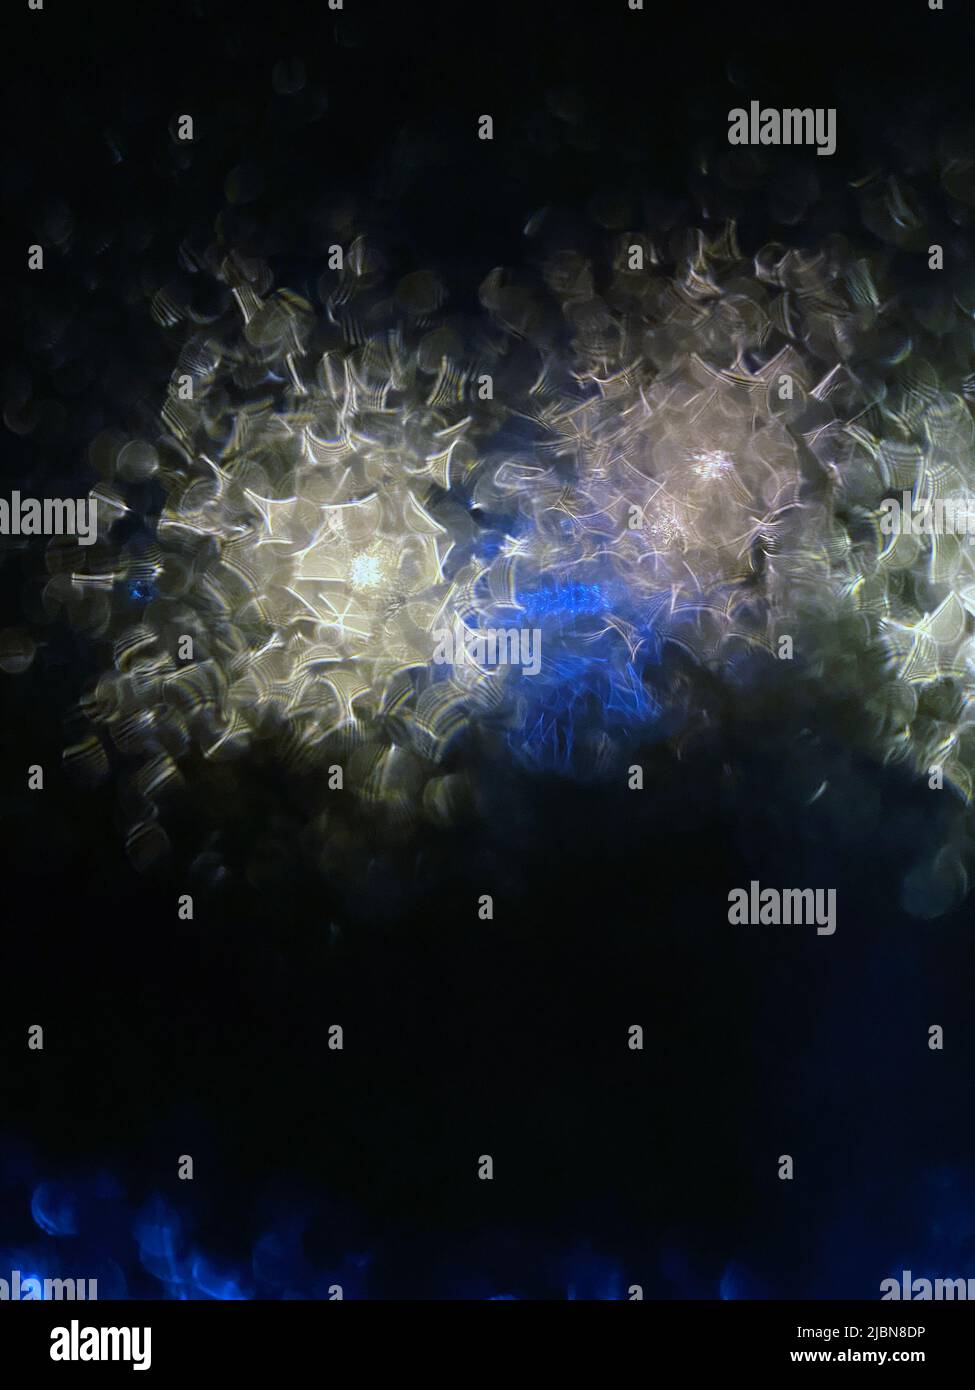 Complex fractals of sparkles in blue and gold colors on a black background. Stock Photo